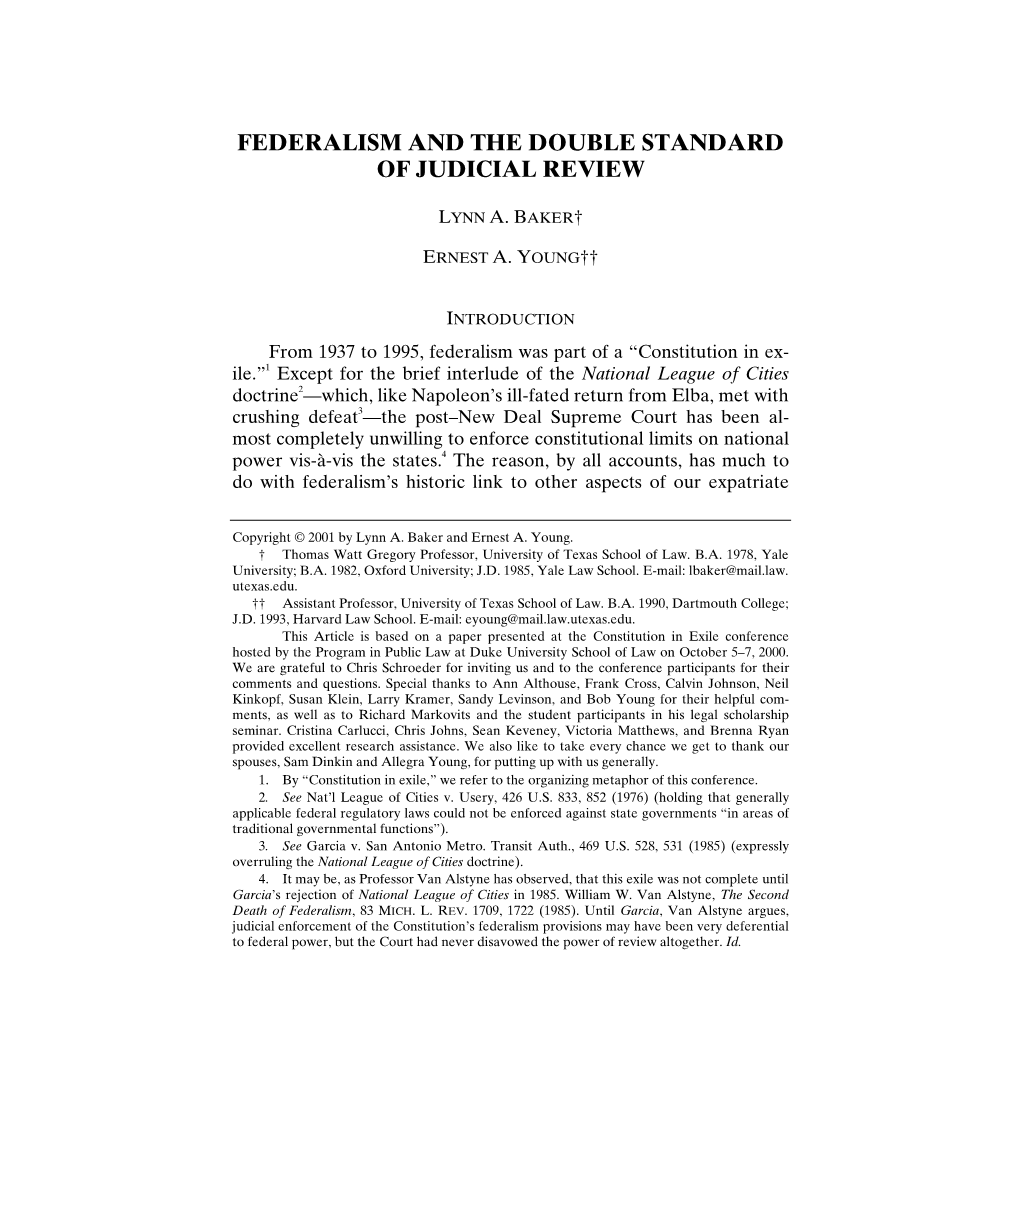 Federalism and the Double Standard of Judicial Review